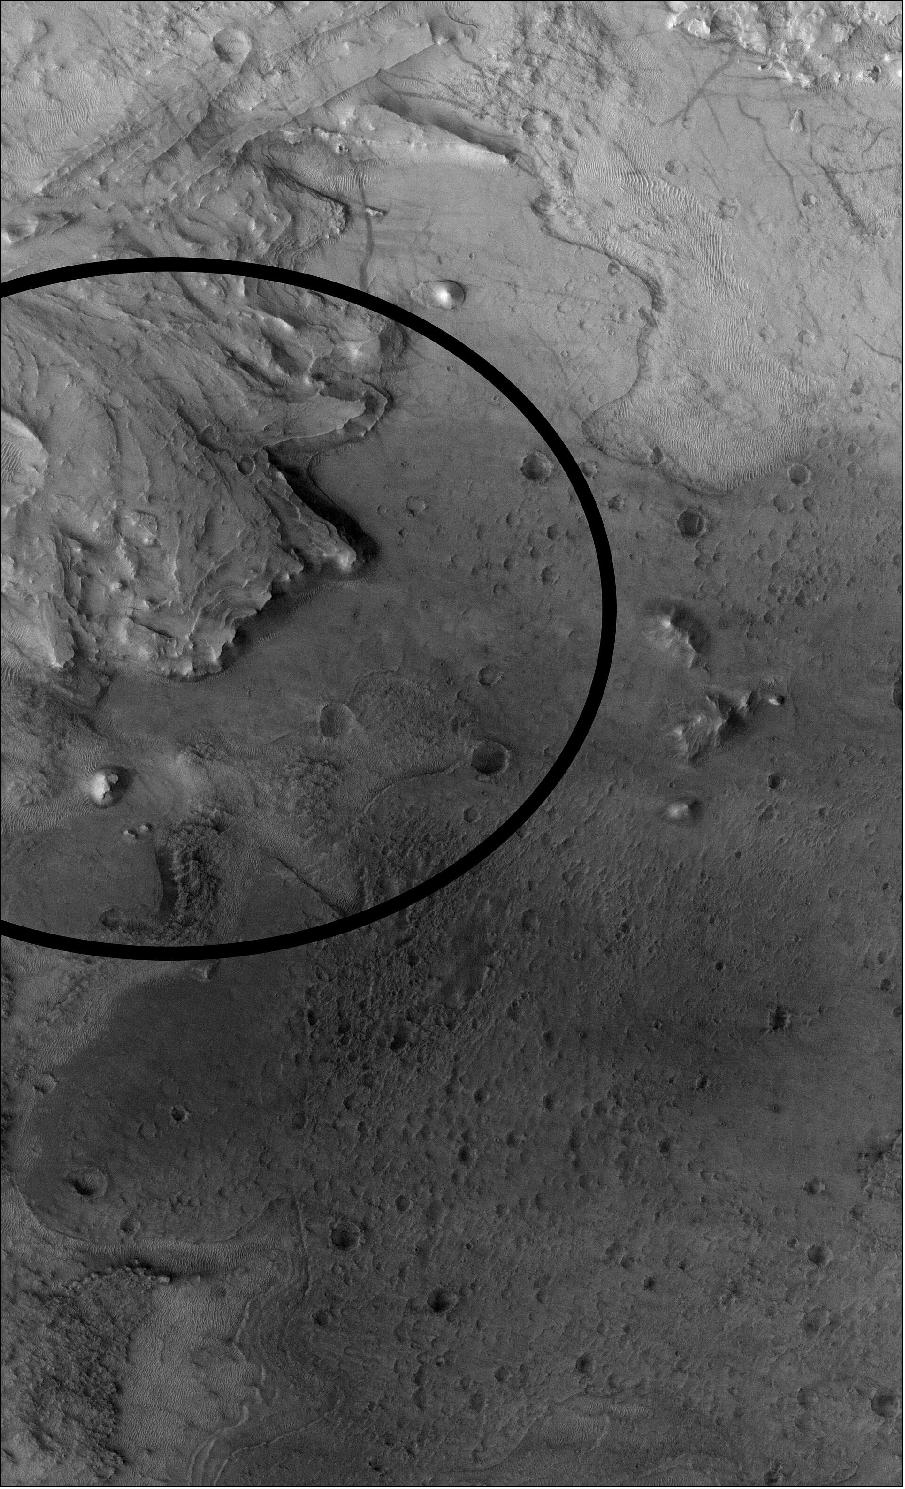 Figure 29: The image was taken by the CaSSIS camera on the ESA-Roscosmos ExoMars Trace Gas Orbiter as part of an imaging campaign of the rover's future neighborhood (image credit: ESA/Roscosmos/CaSSIS, CC BY-SA 3.0 IGO)